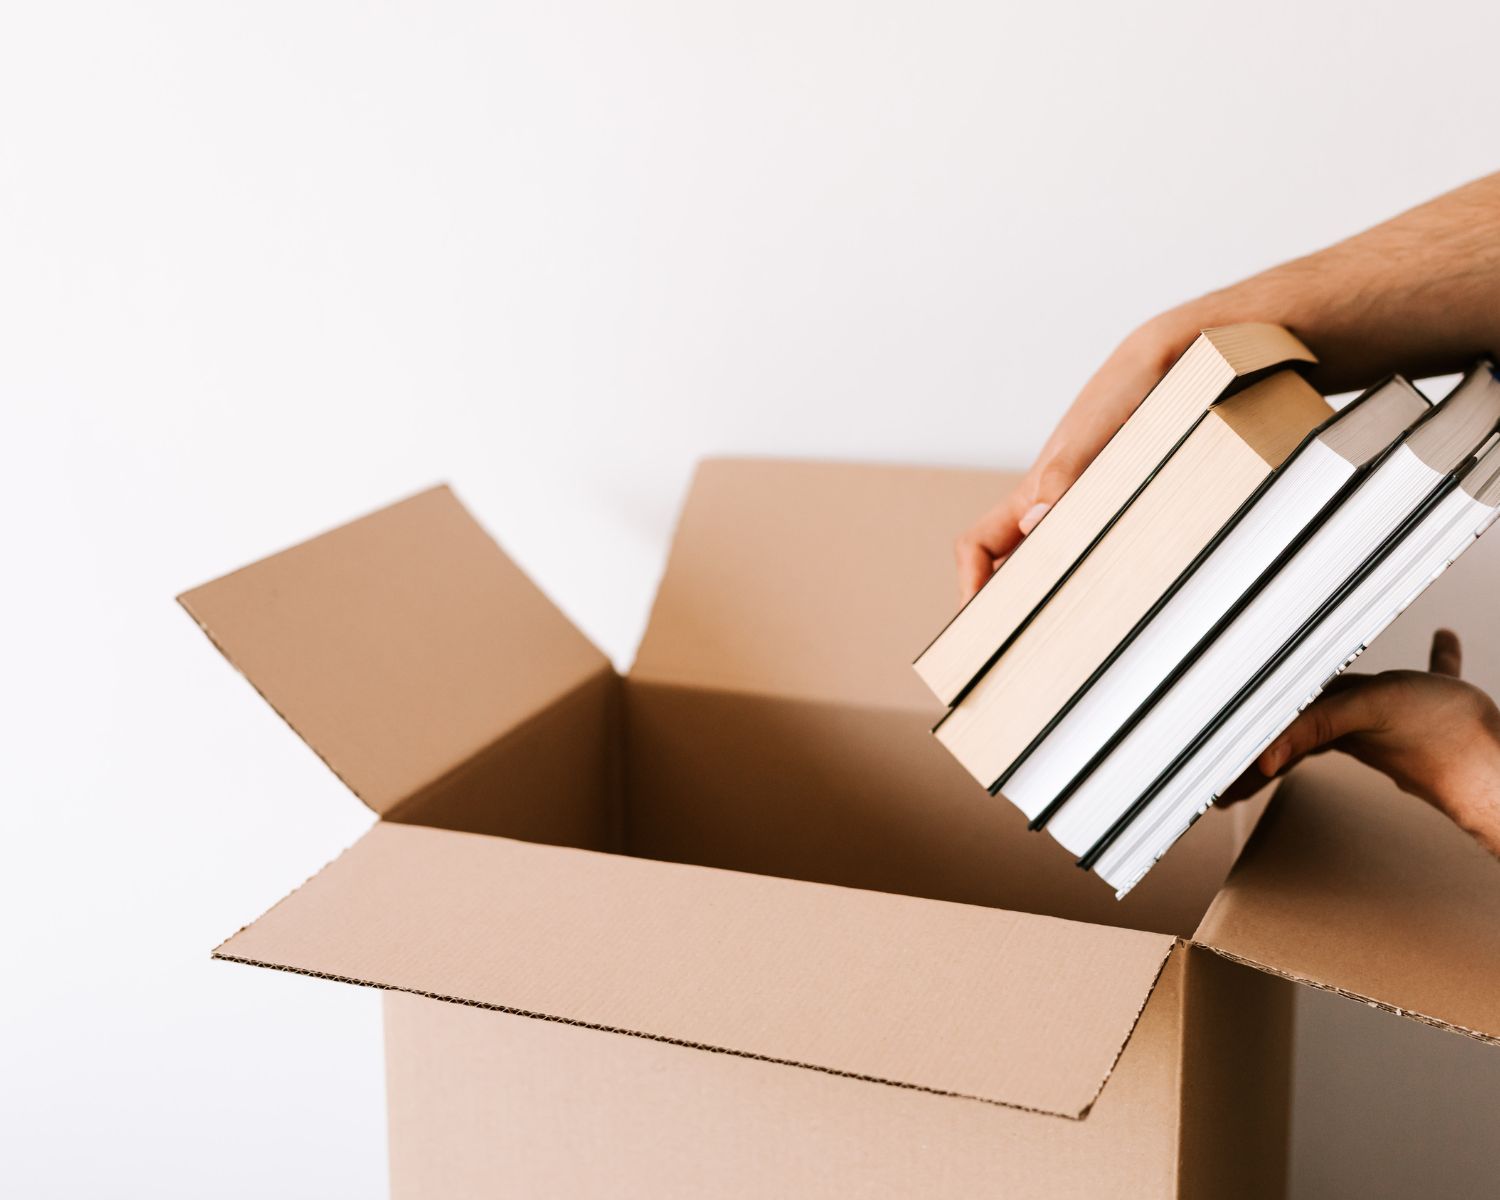 A picture of a person pulling books out of a cardboard box